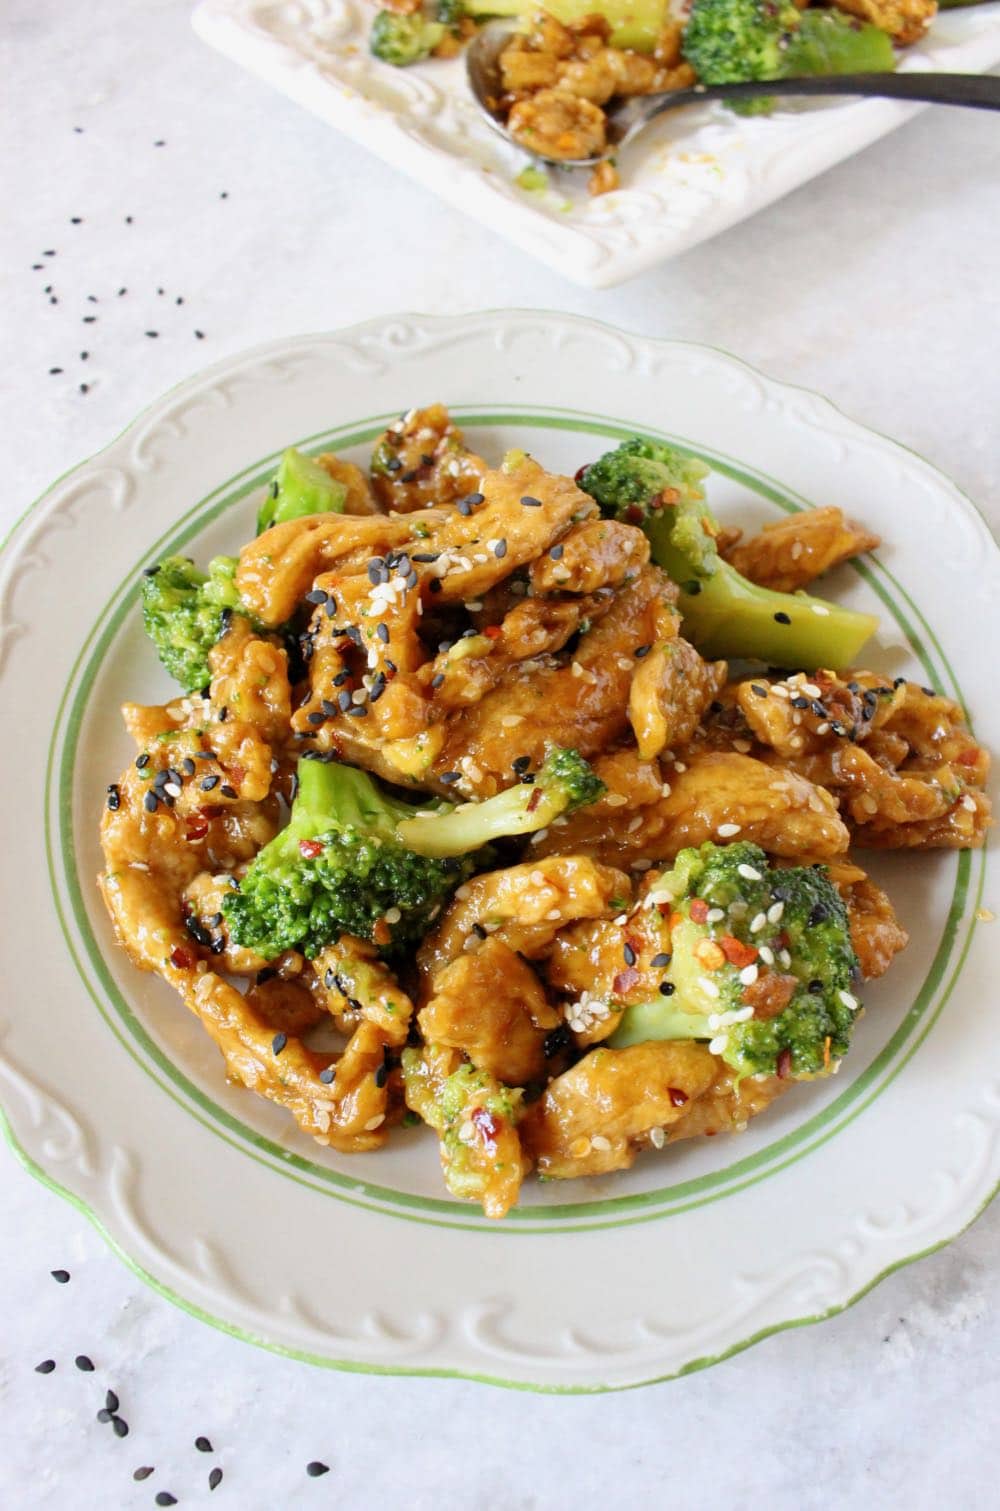 Plate of vegan chick'n with broccoli.